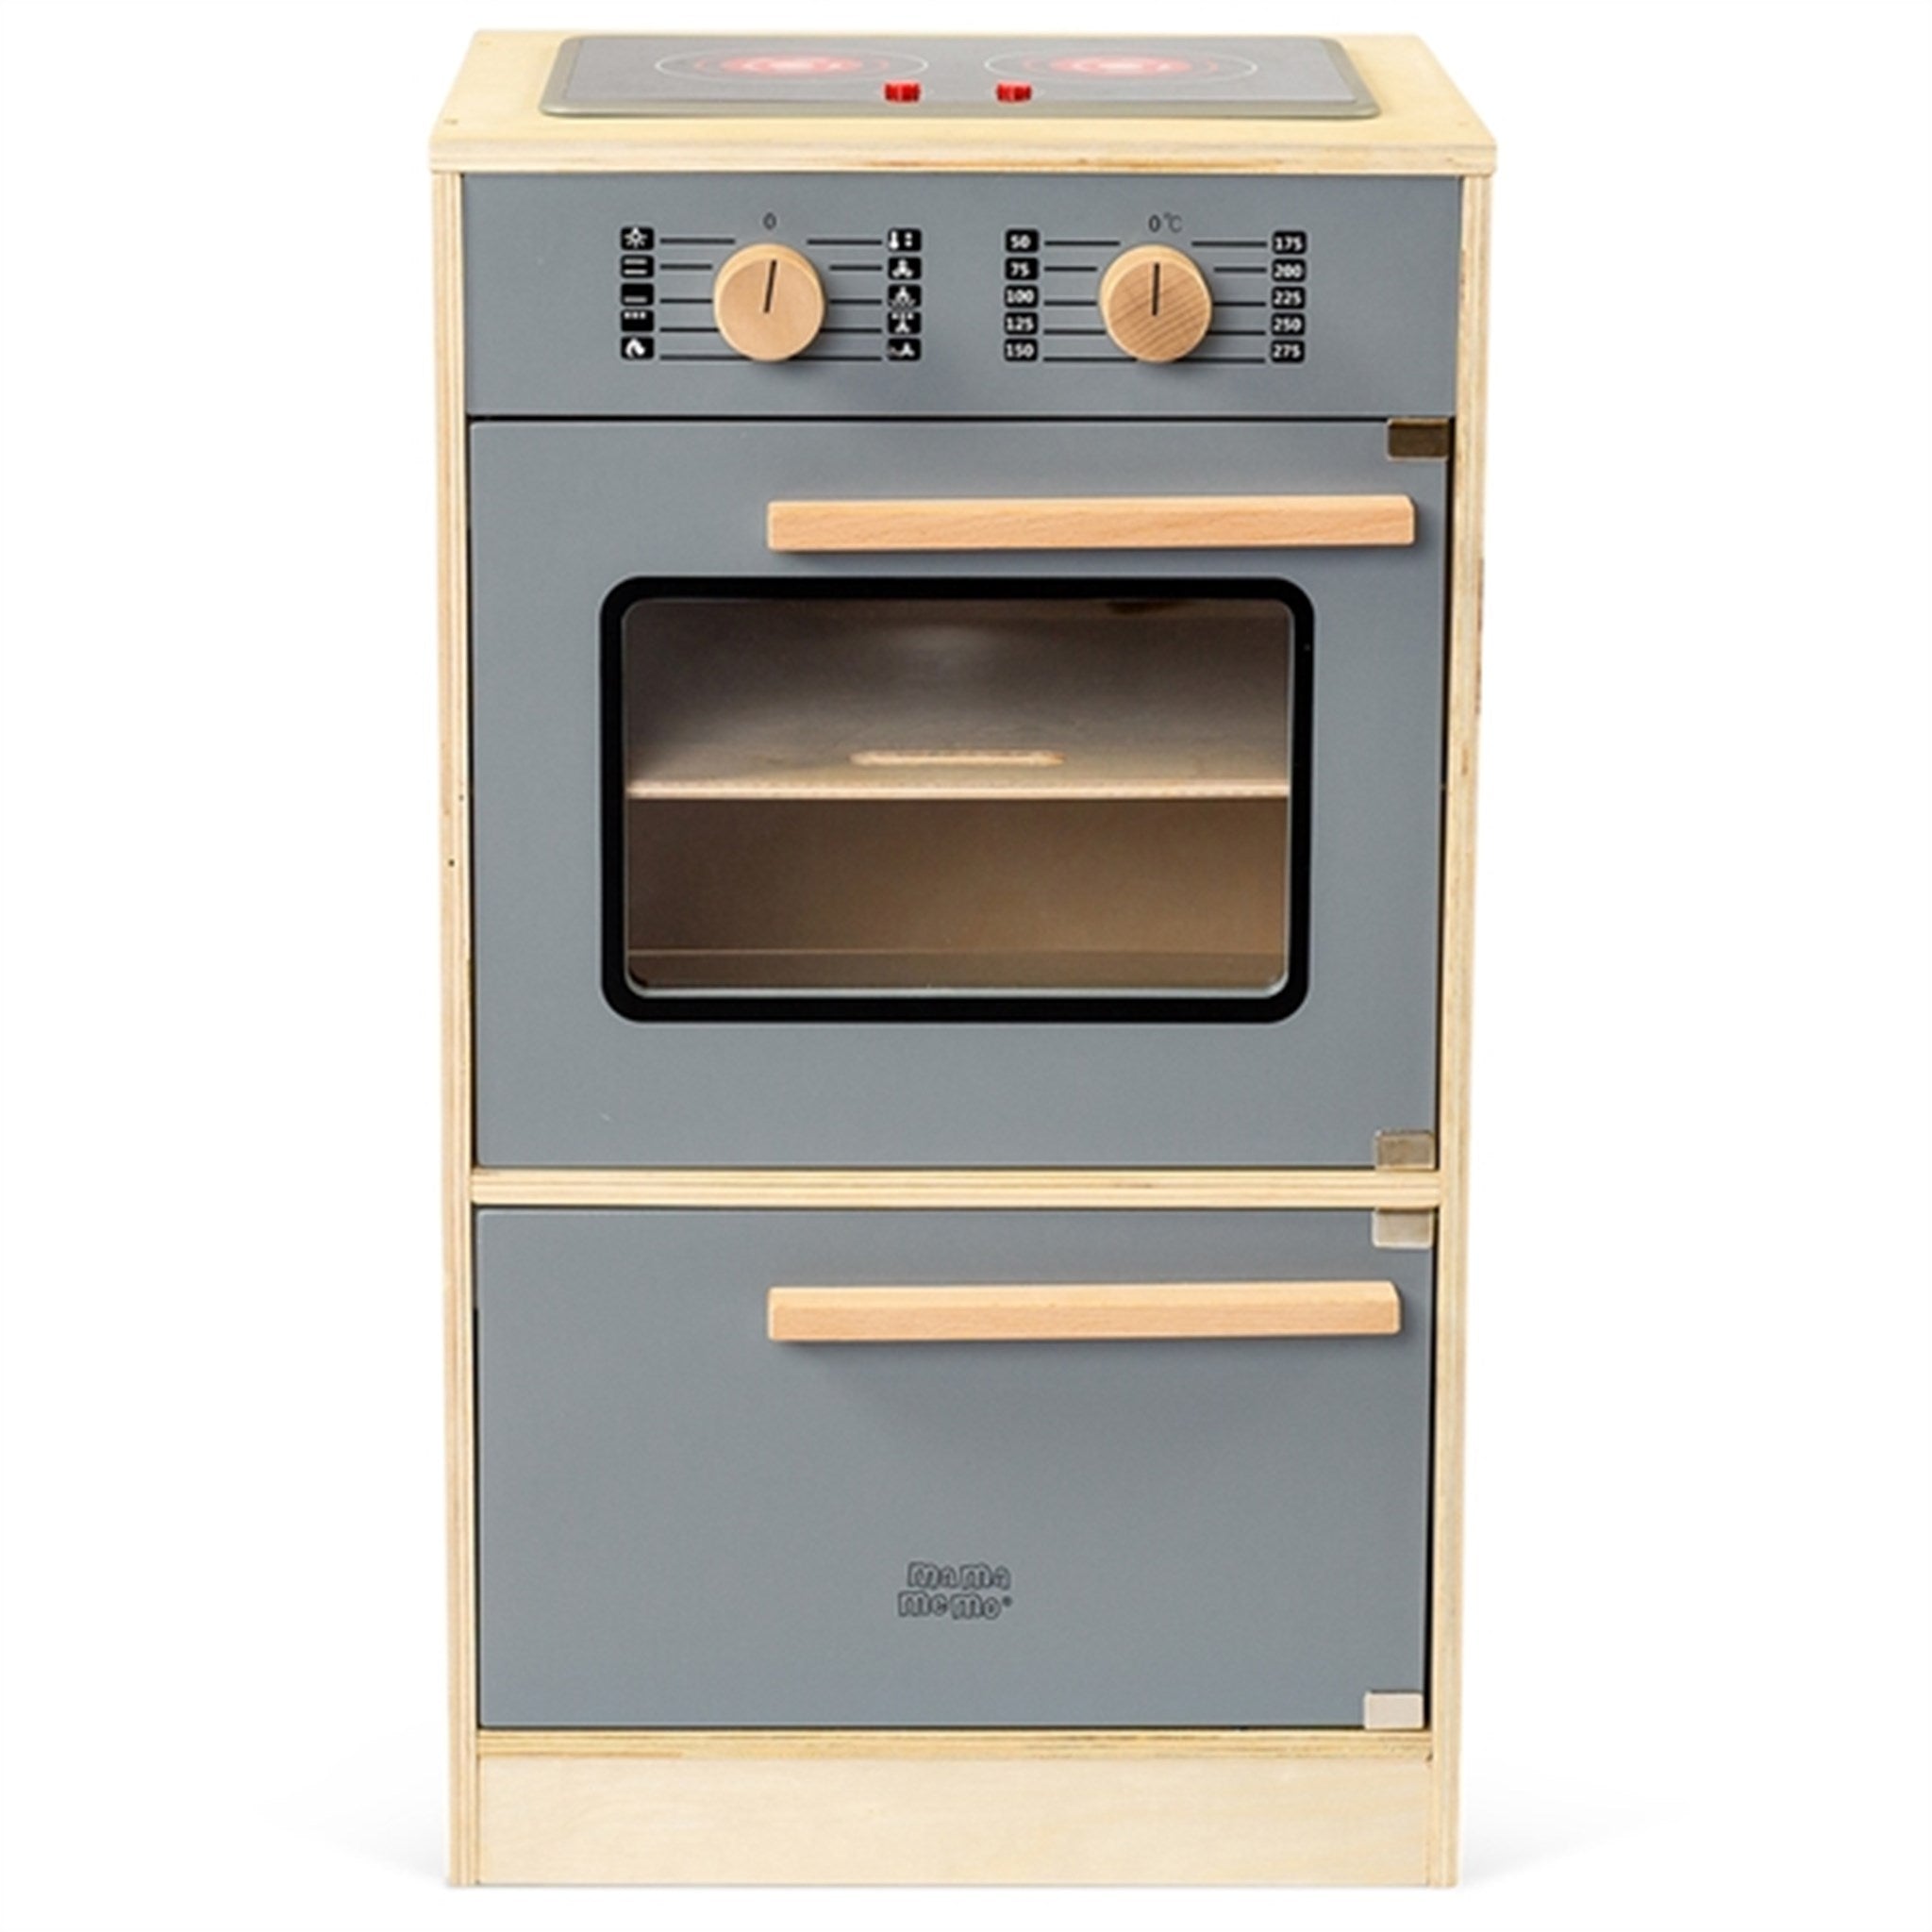 MaMaMeMo Oven with Hob Emerald Grey